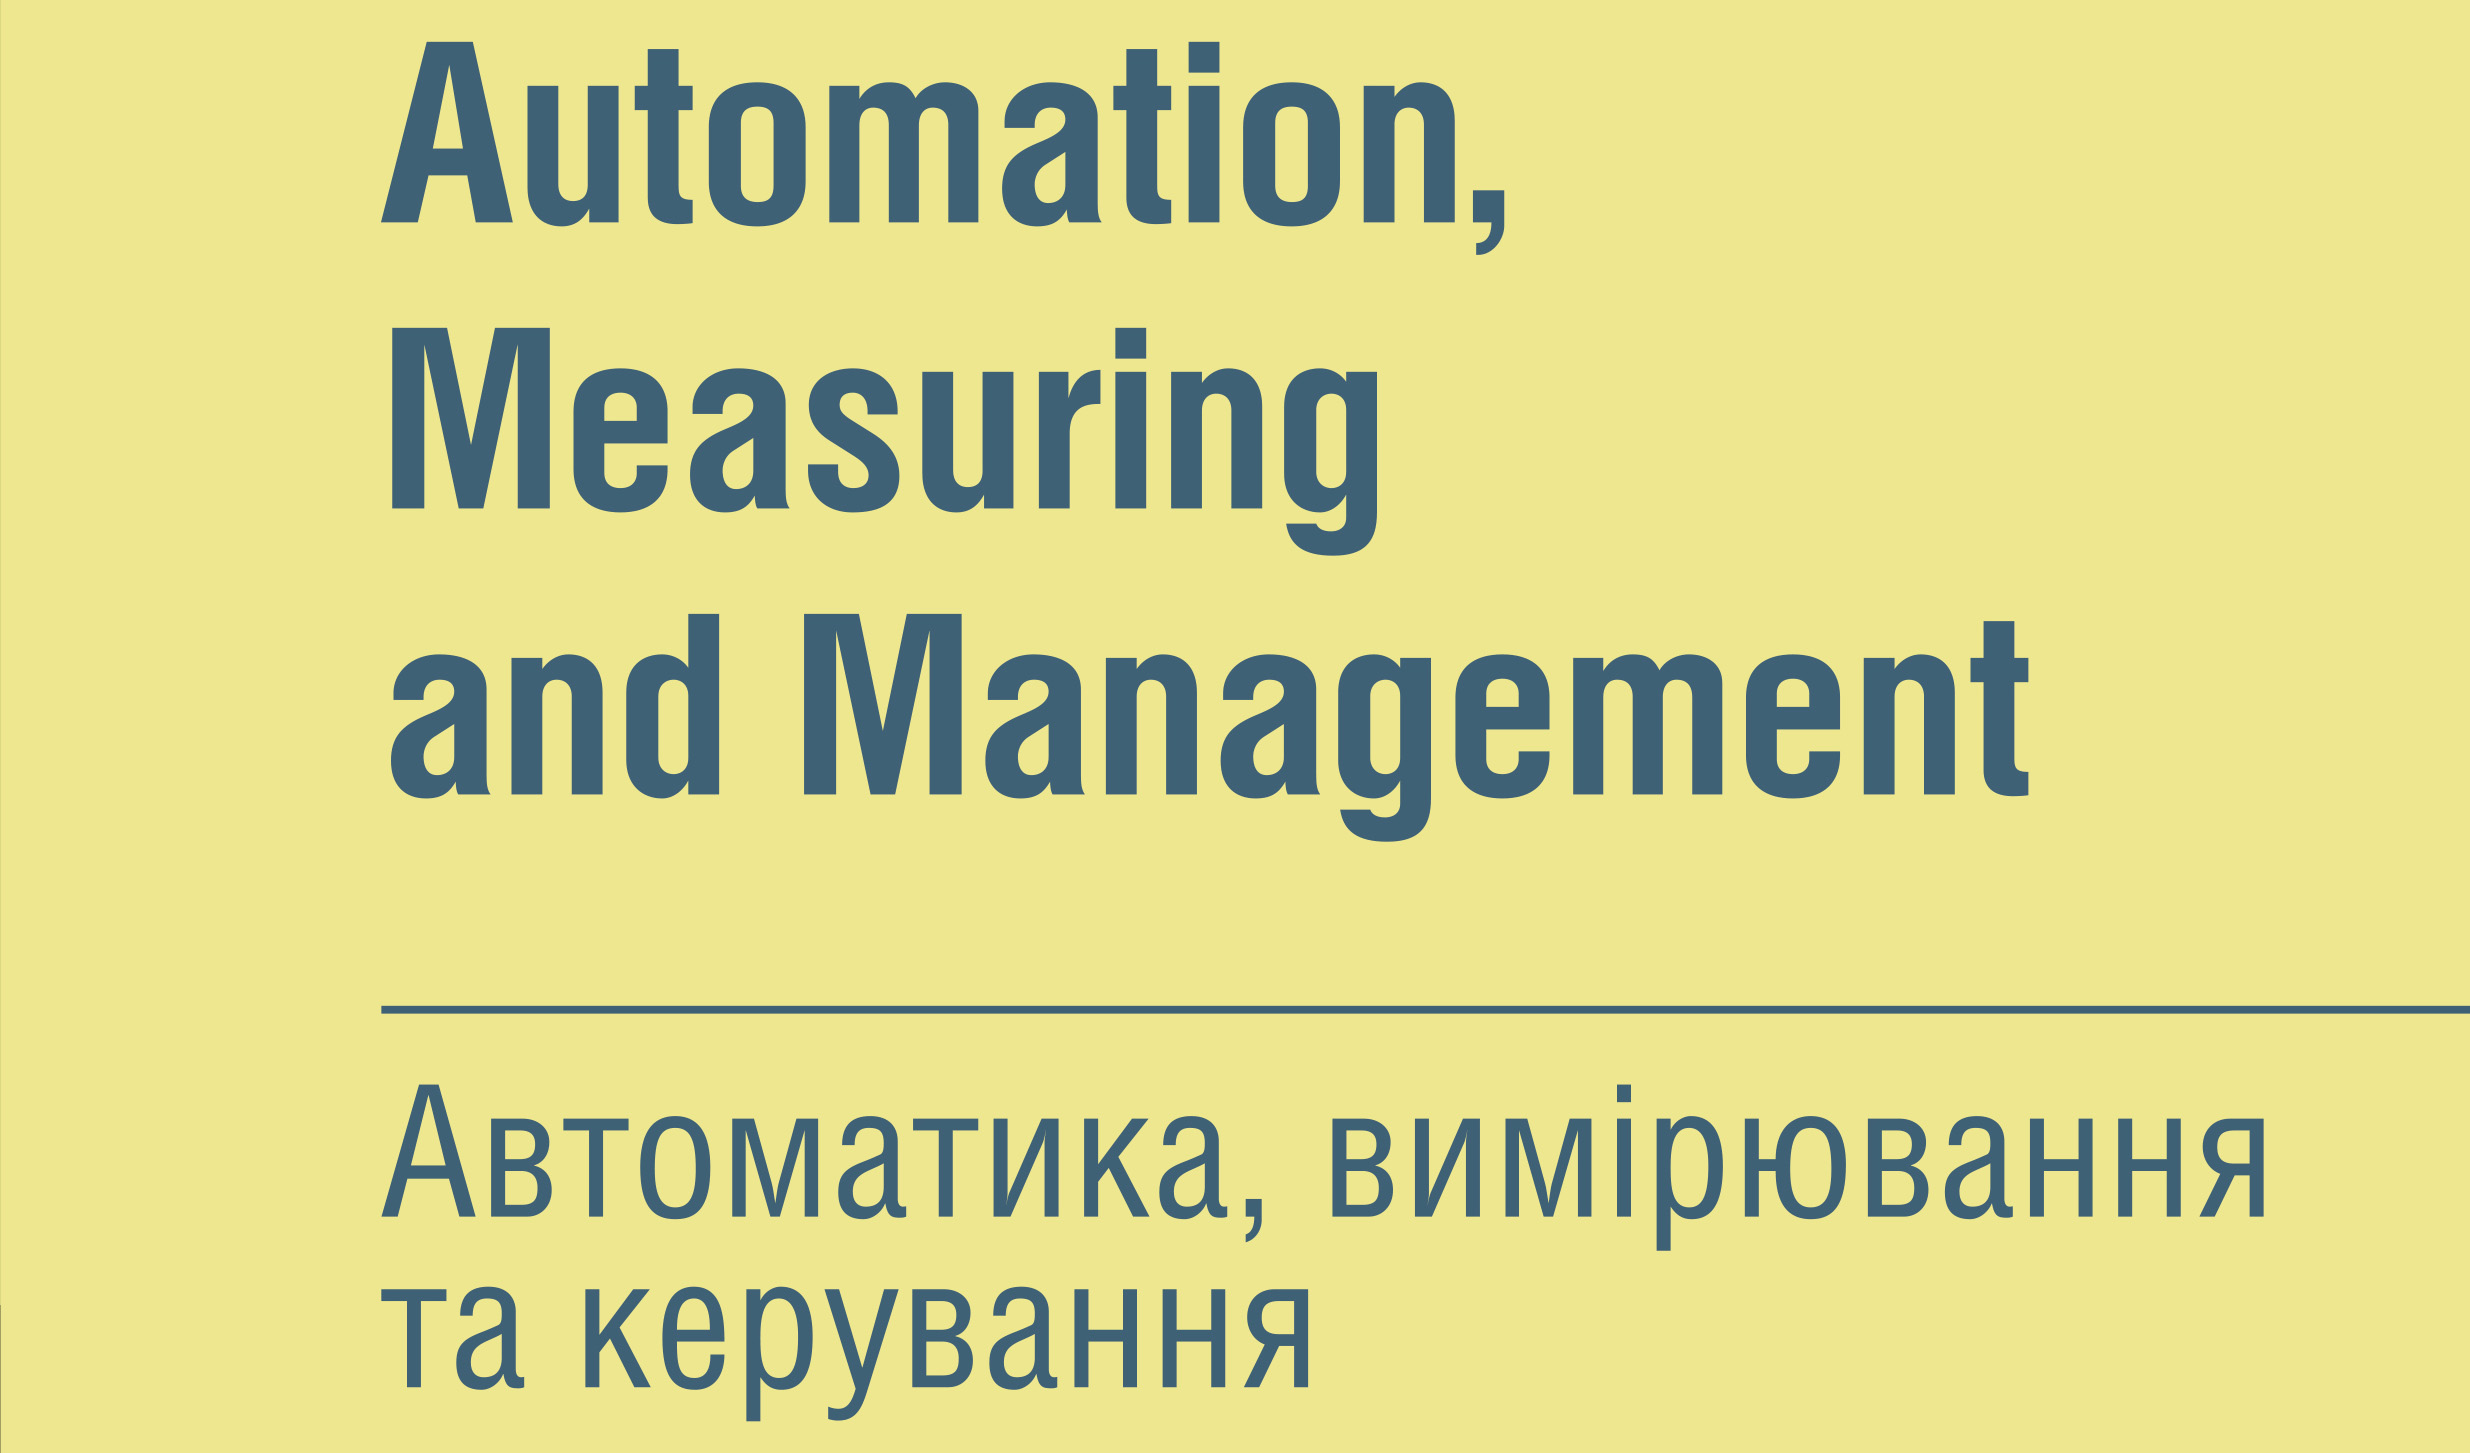 Automation, Measuring and Management